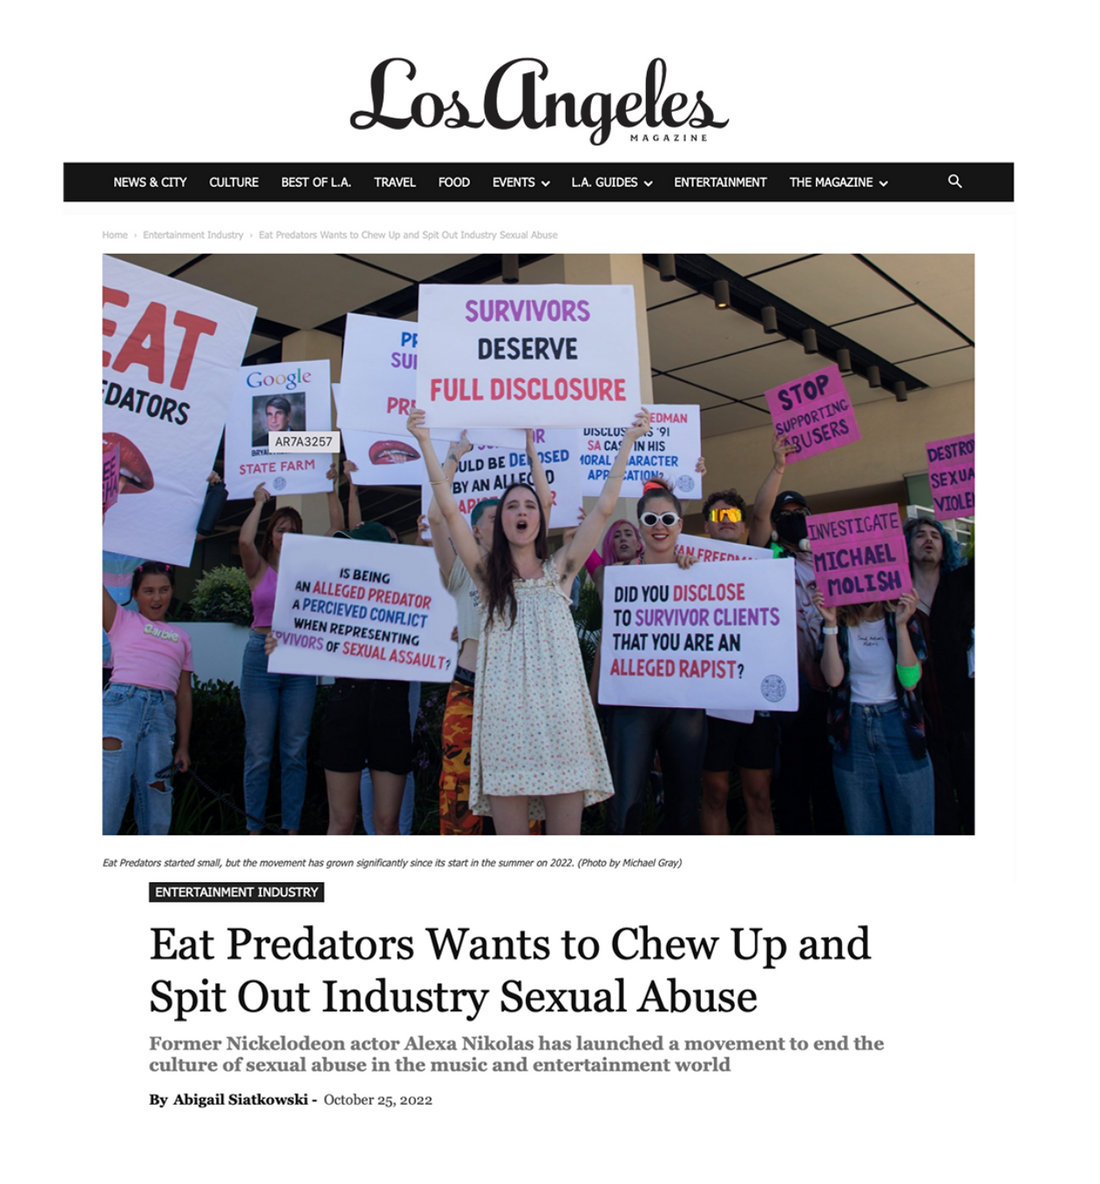 Eat Predators Wants to Chew Up and Spit Out Industry Sexual Abuse